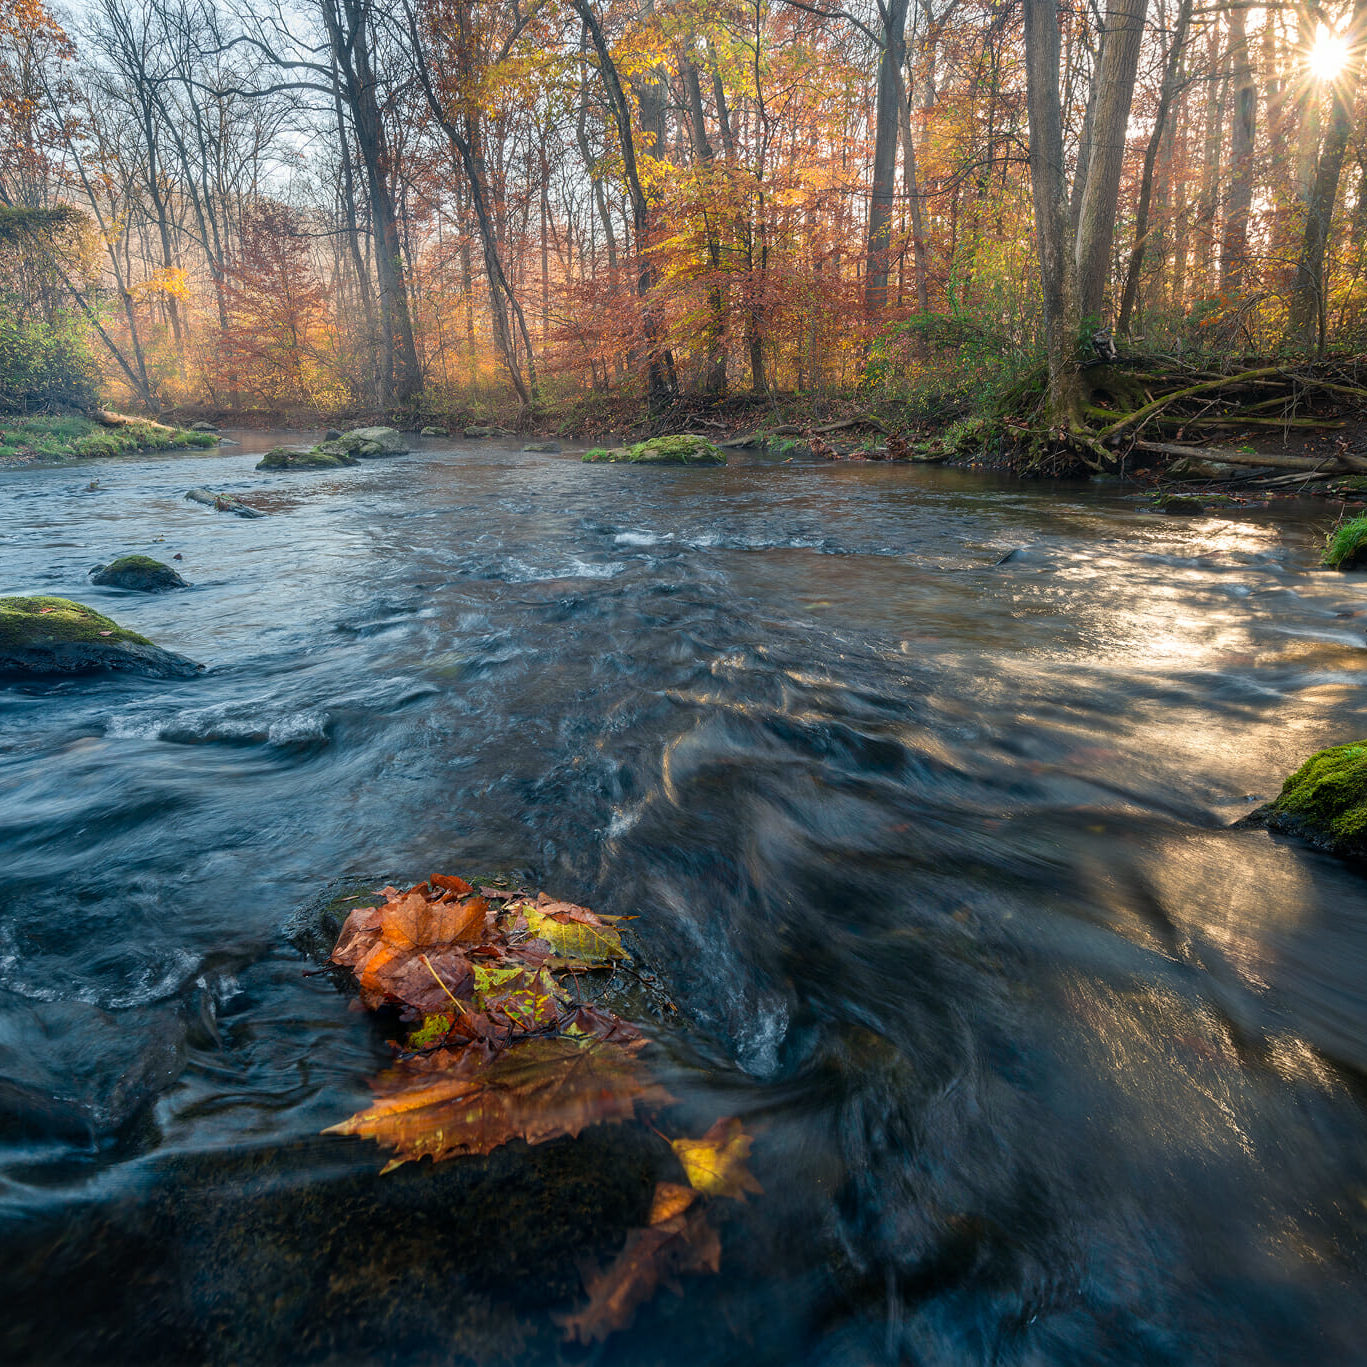 Ridley Creek rushes through the state park in southeastern Pennsylvania on a crisp autumn morning as the sun breaks through the trees.